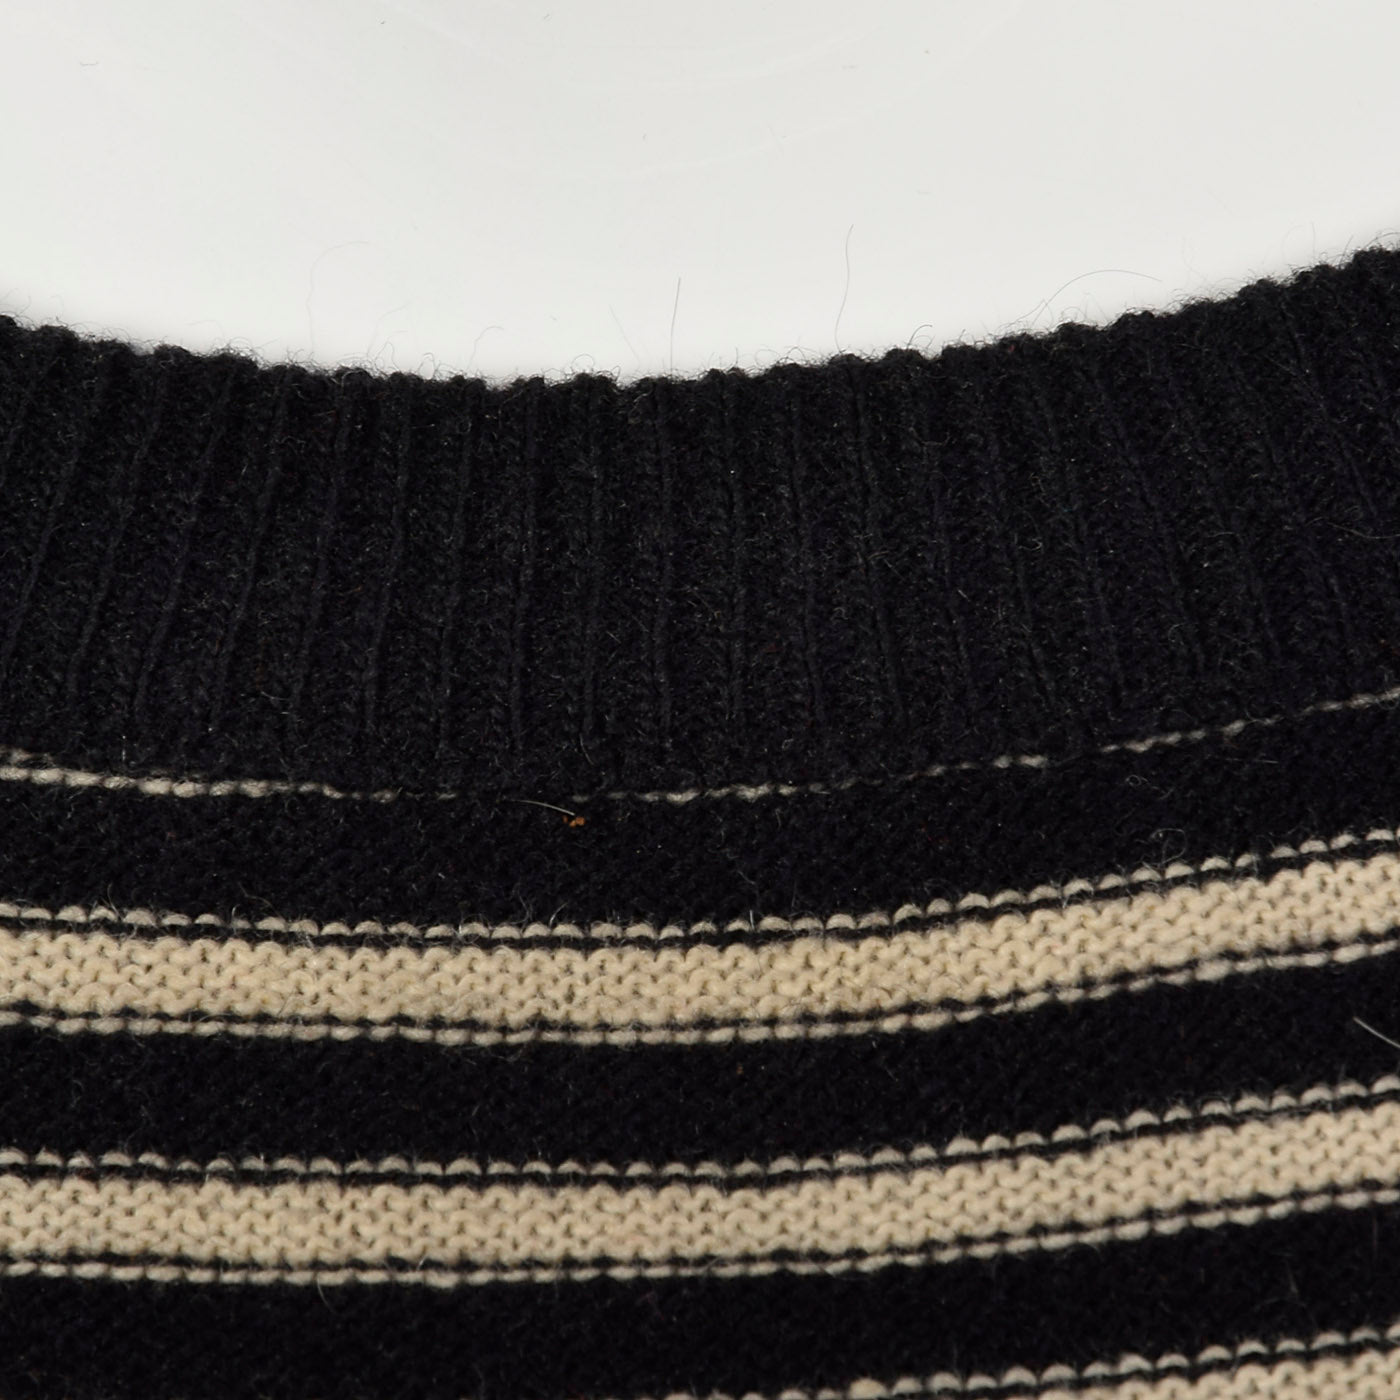 Small Sonia Rykiel 1990s Oversized Black and White Striped Sweater